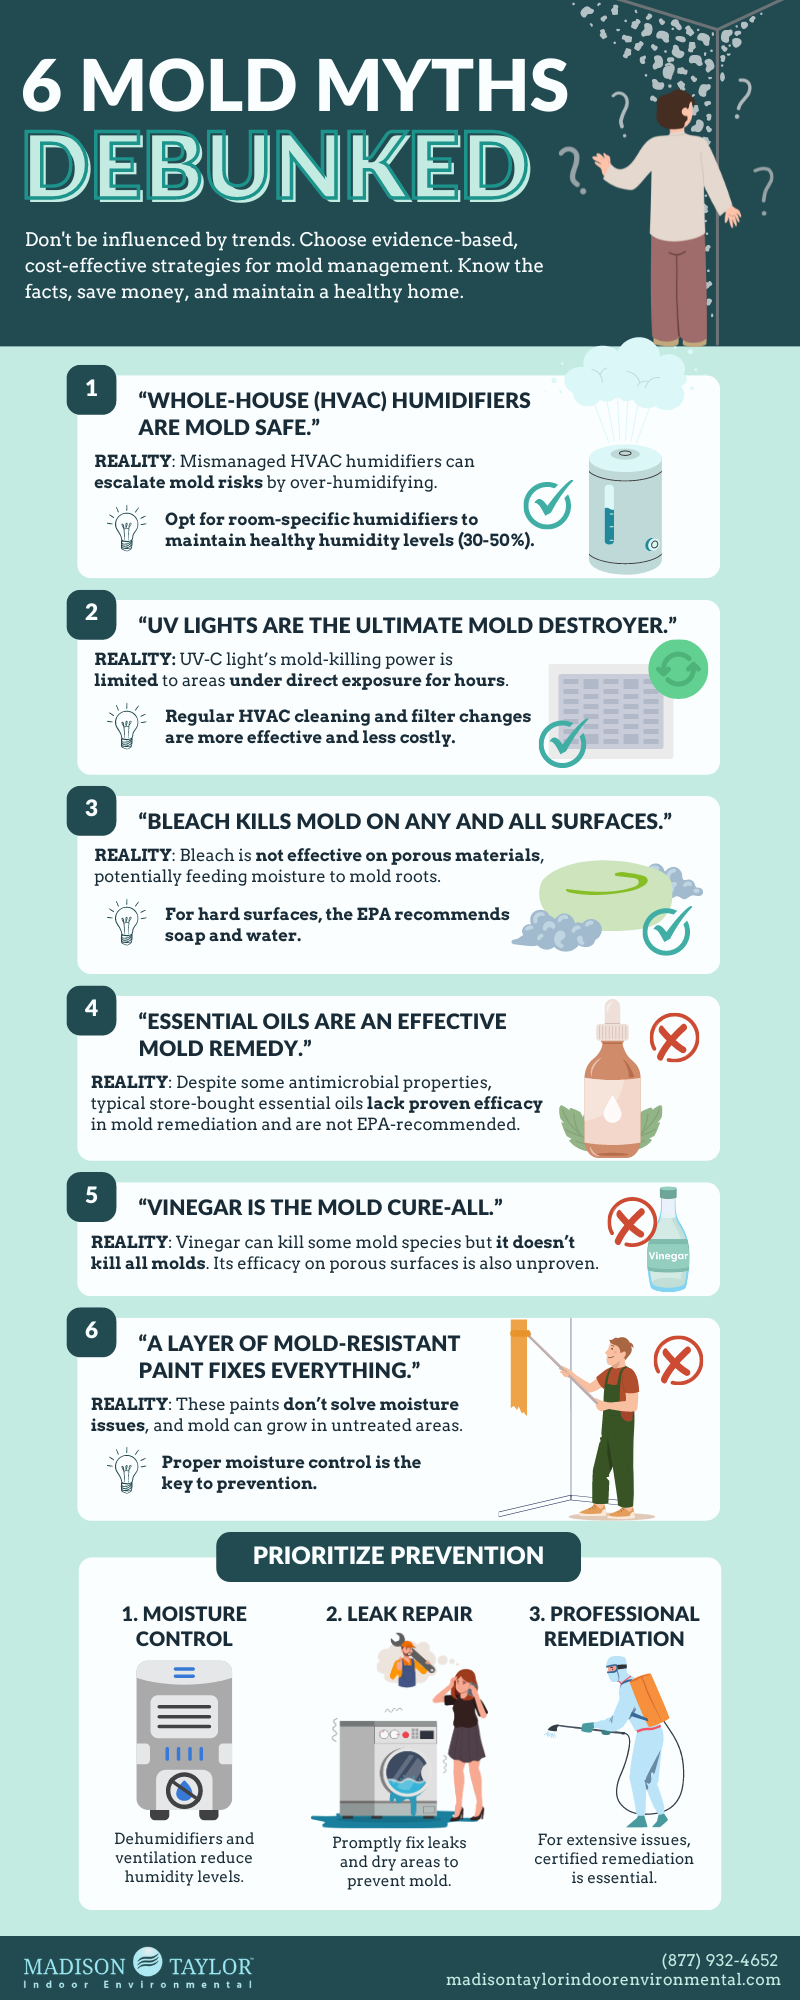 6 mold myths debunked infographic